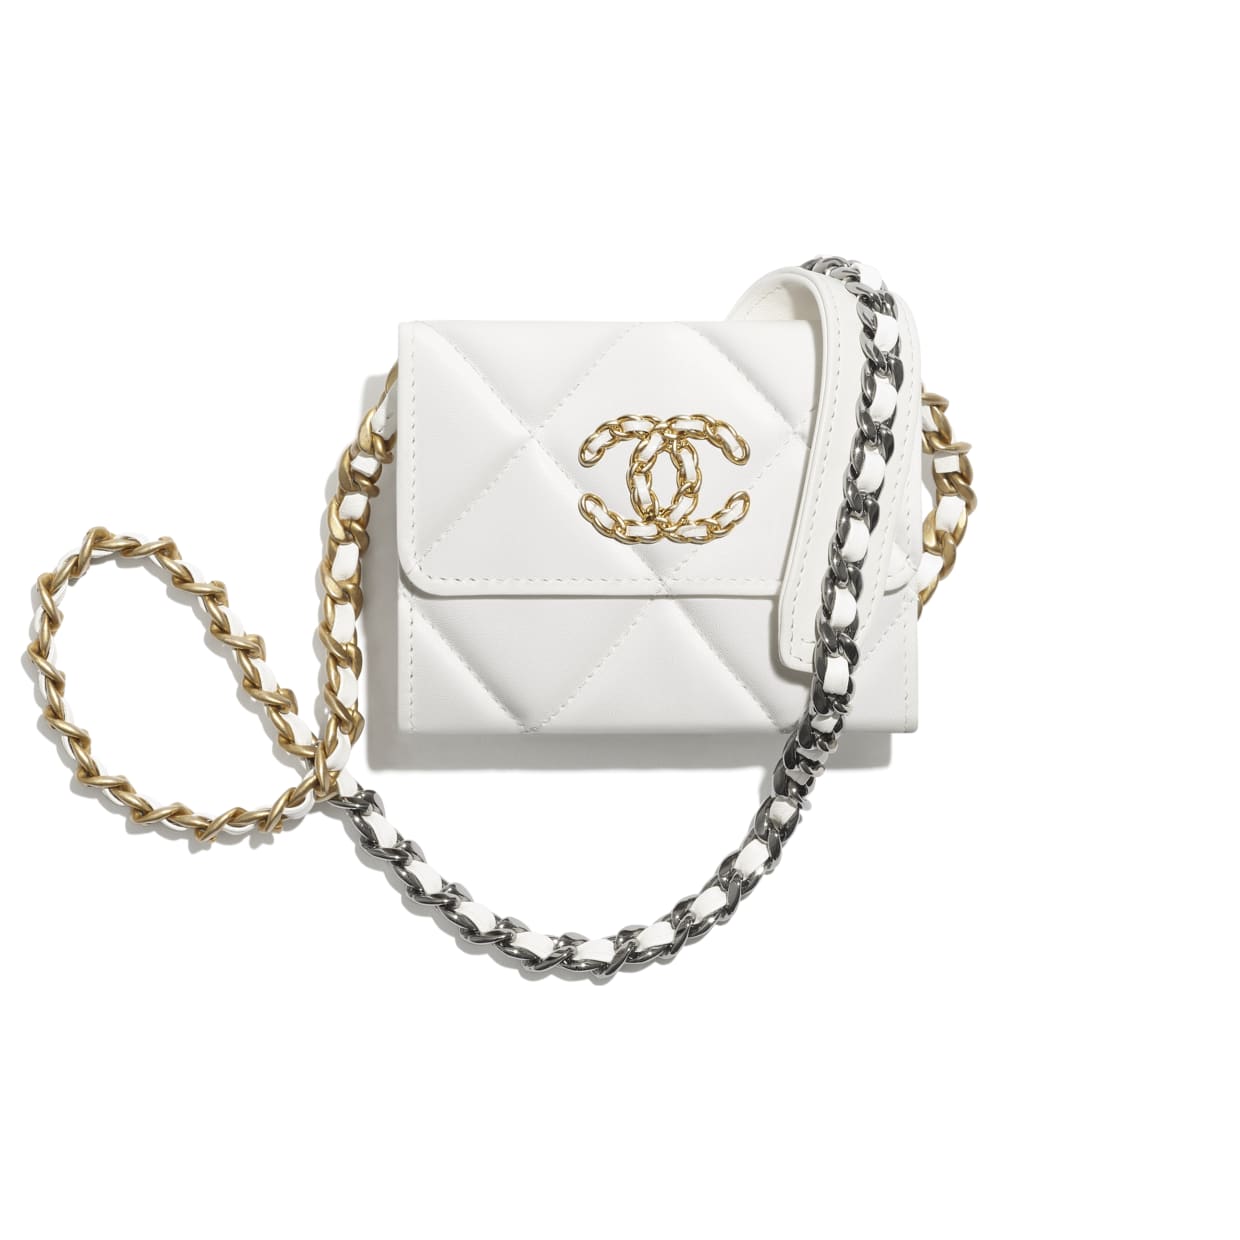 Chanel Cardholder with a Chain Reference Guide - Spotted Fashion